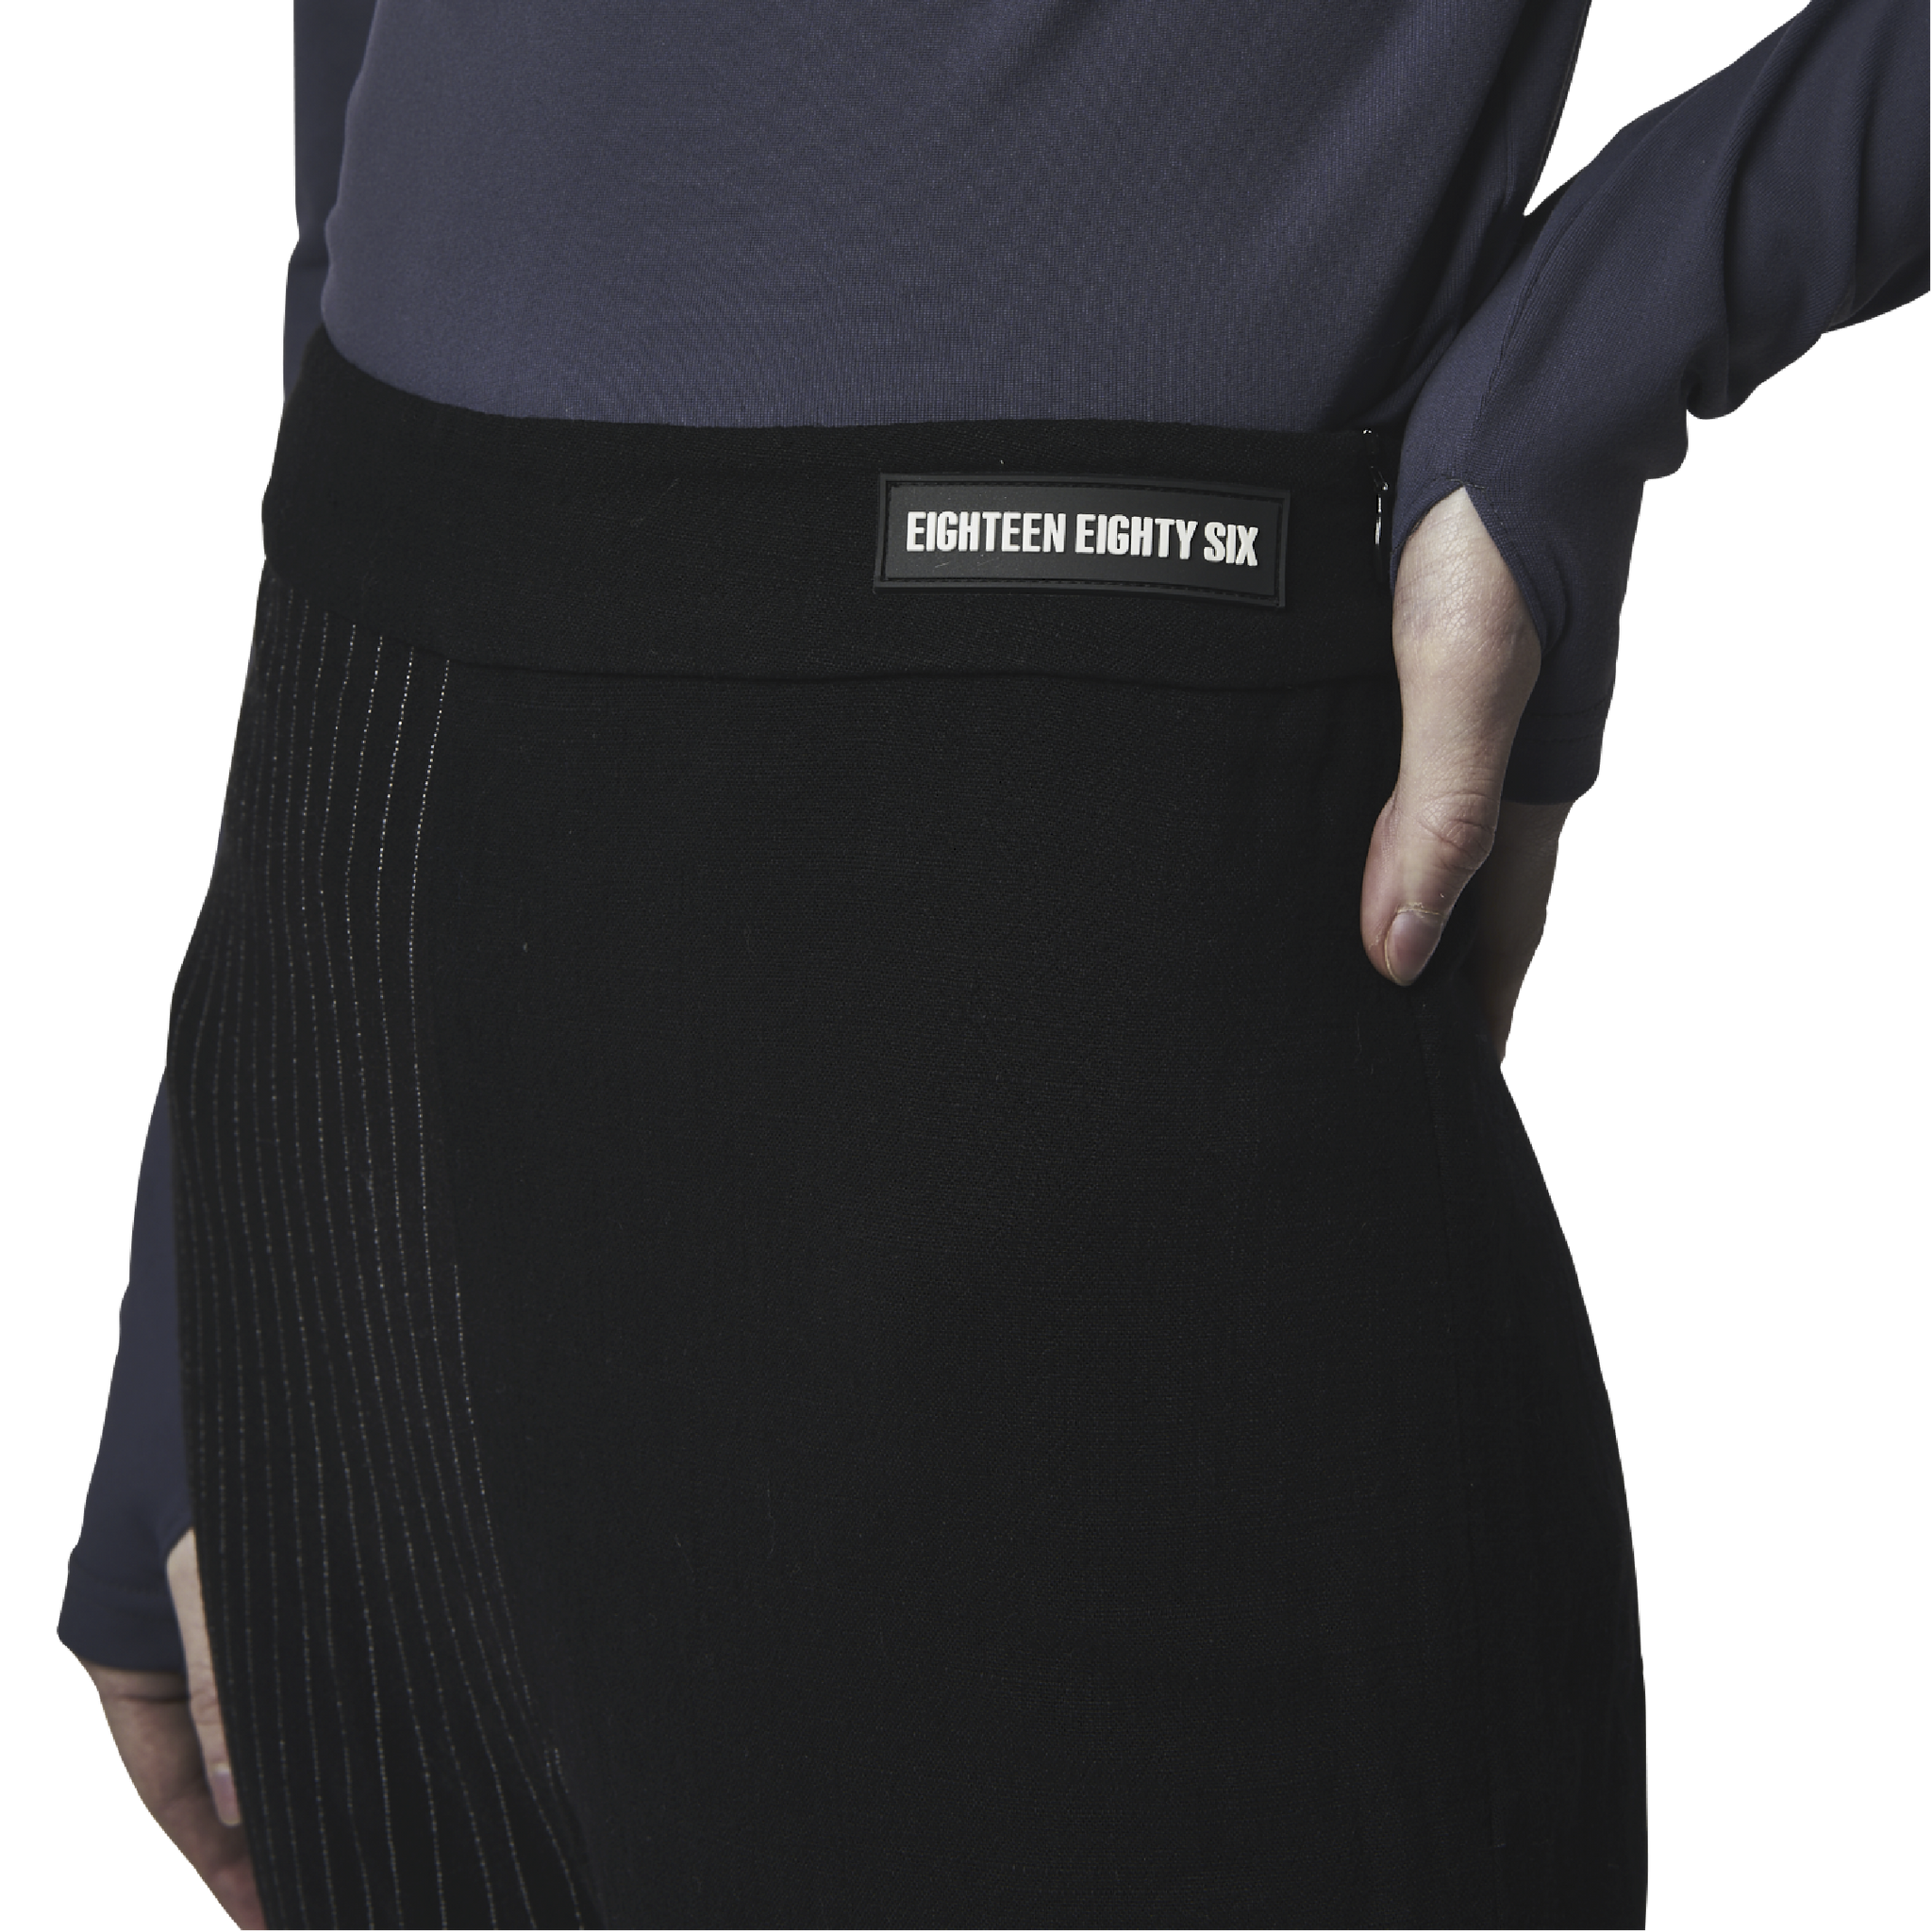 Classic fit flared cut pants in black fabric featuring Eighteen Eighty-Six logo patch sewn at waist. Lines details at legs. High waist.